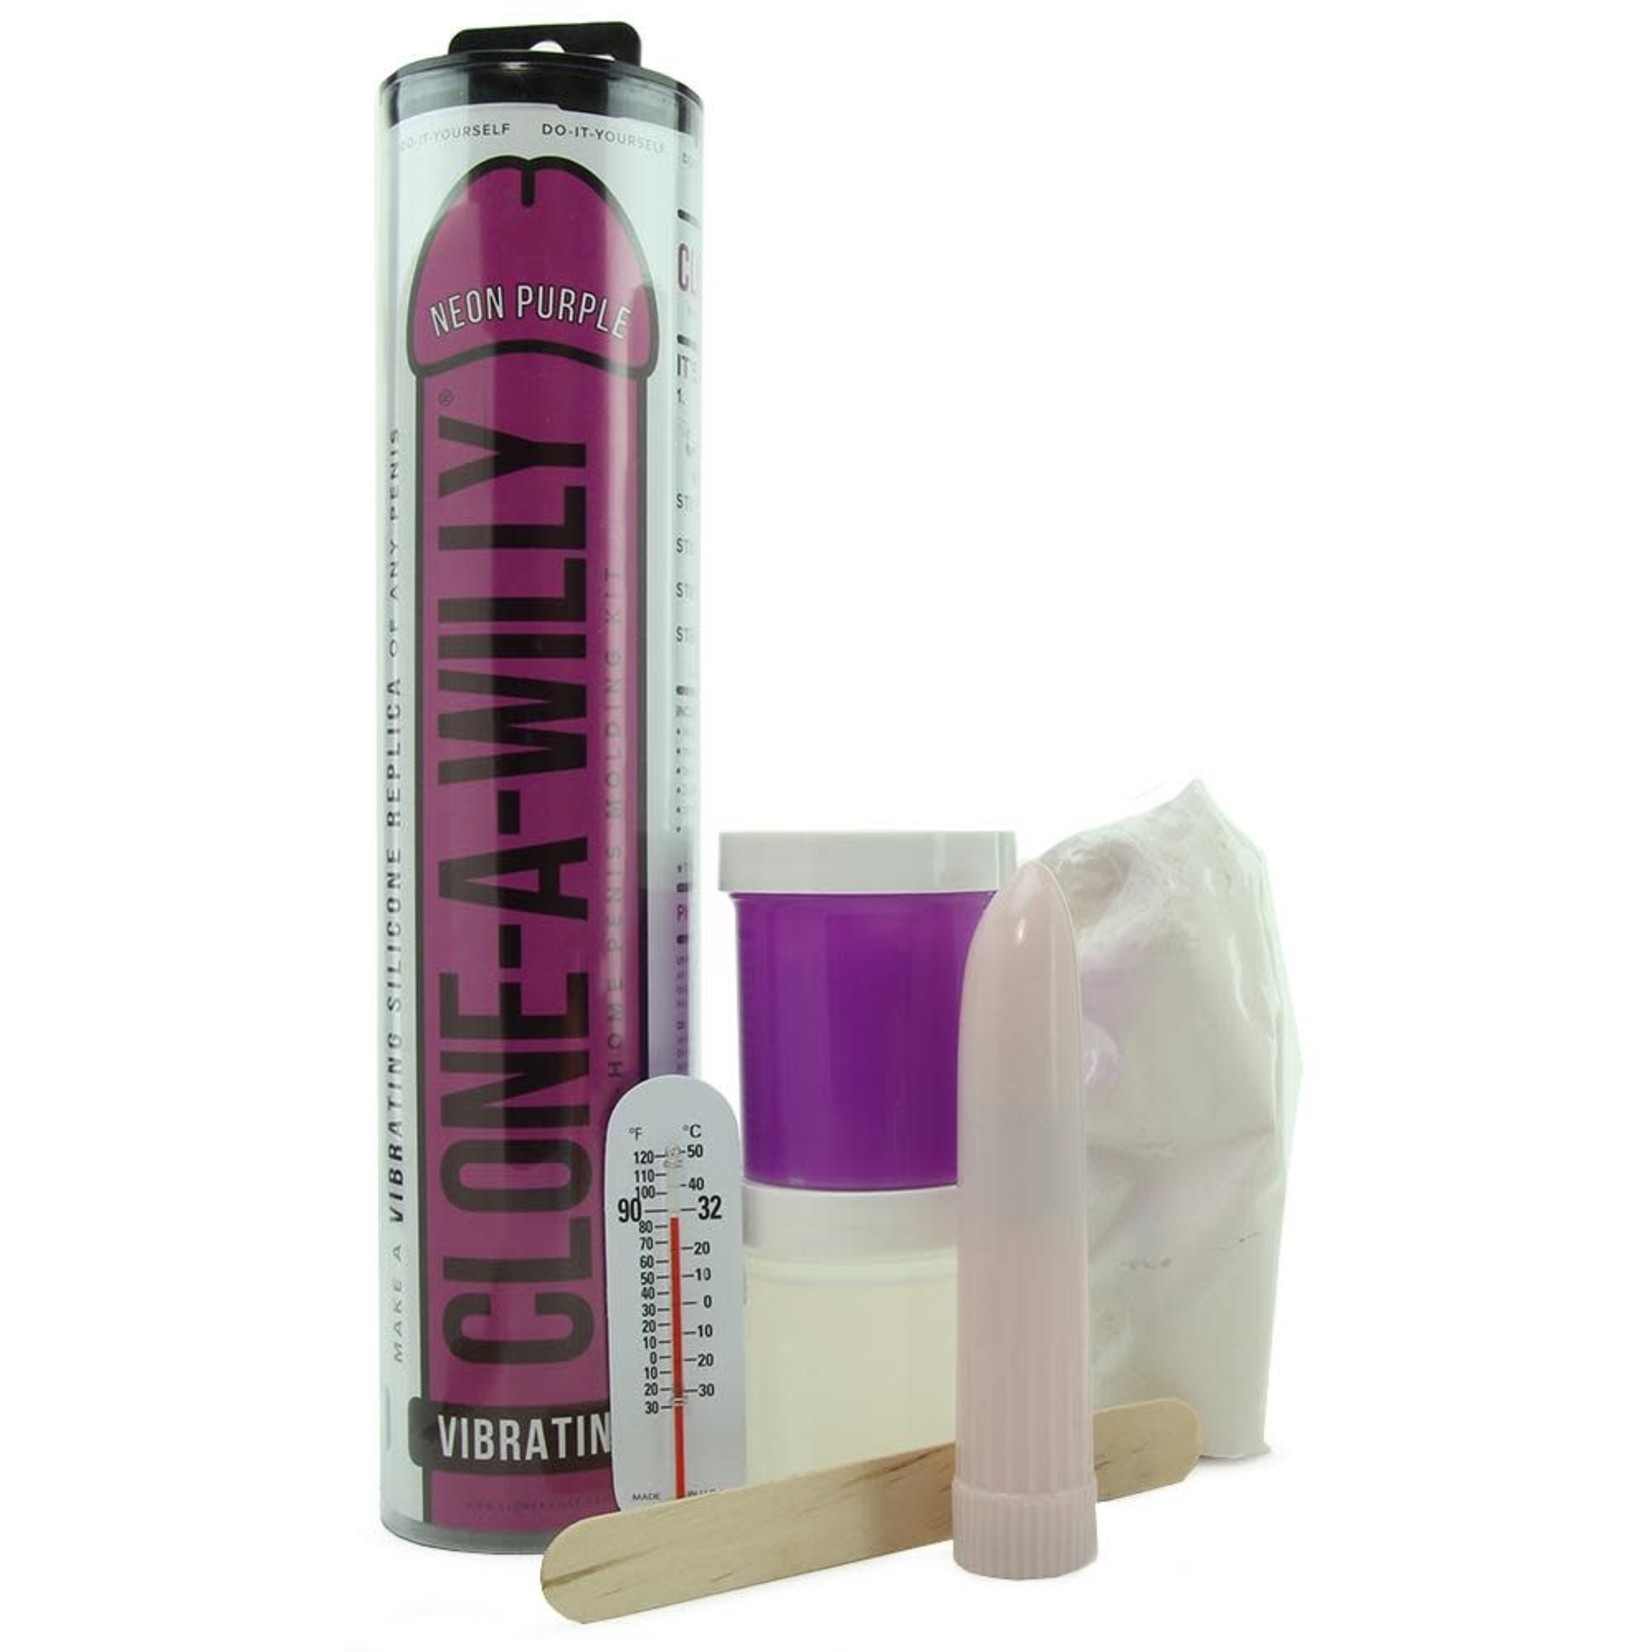 CLONE A WILLY (EMPIRE LABS) CLONE-A-WILLY VIBRATOR KIT - NEON PURPLE